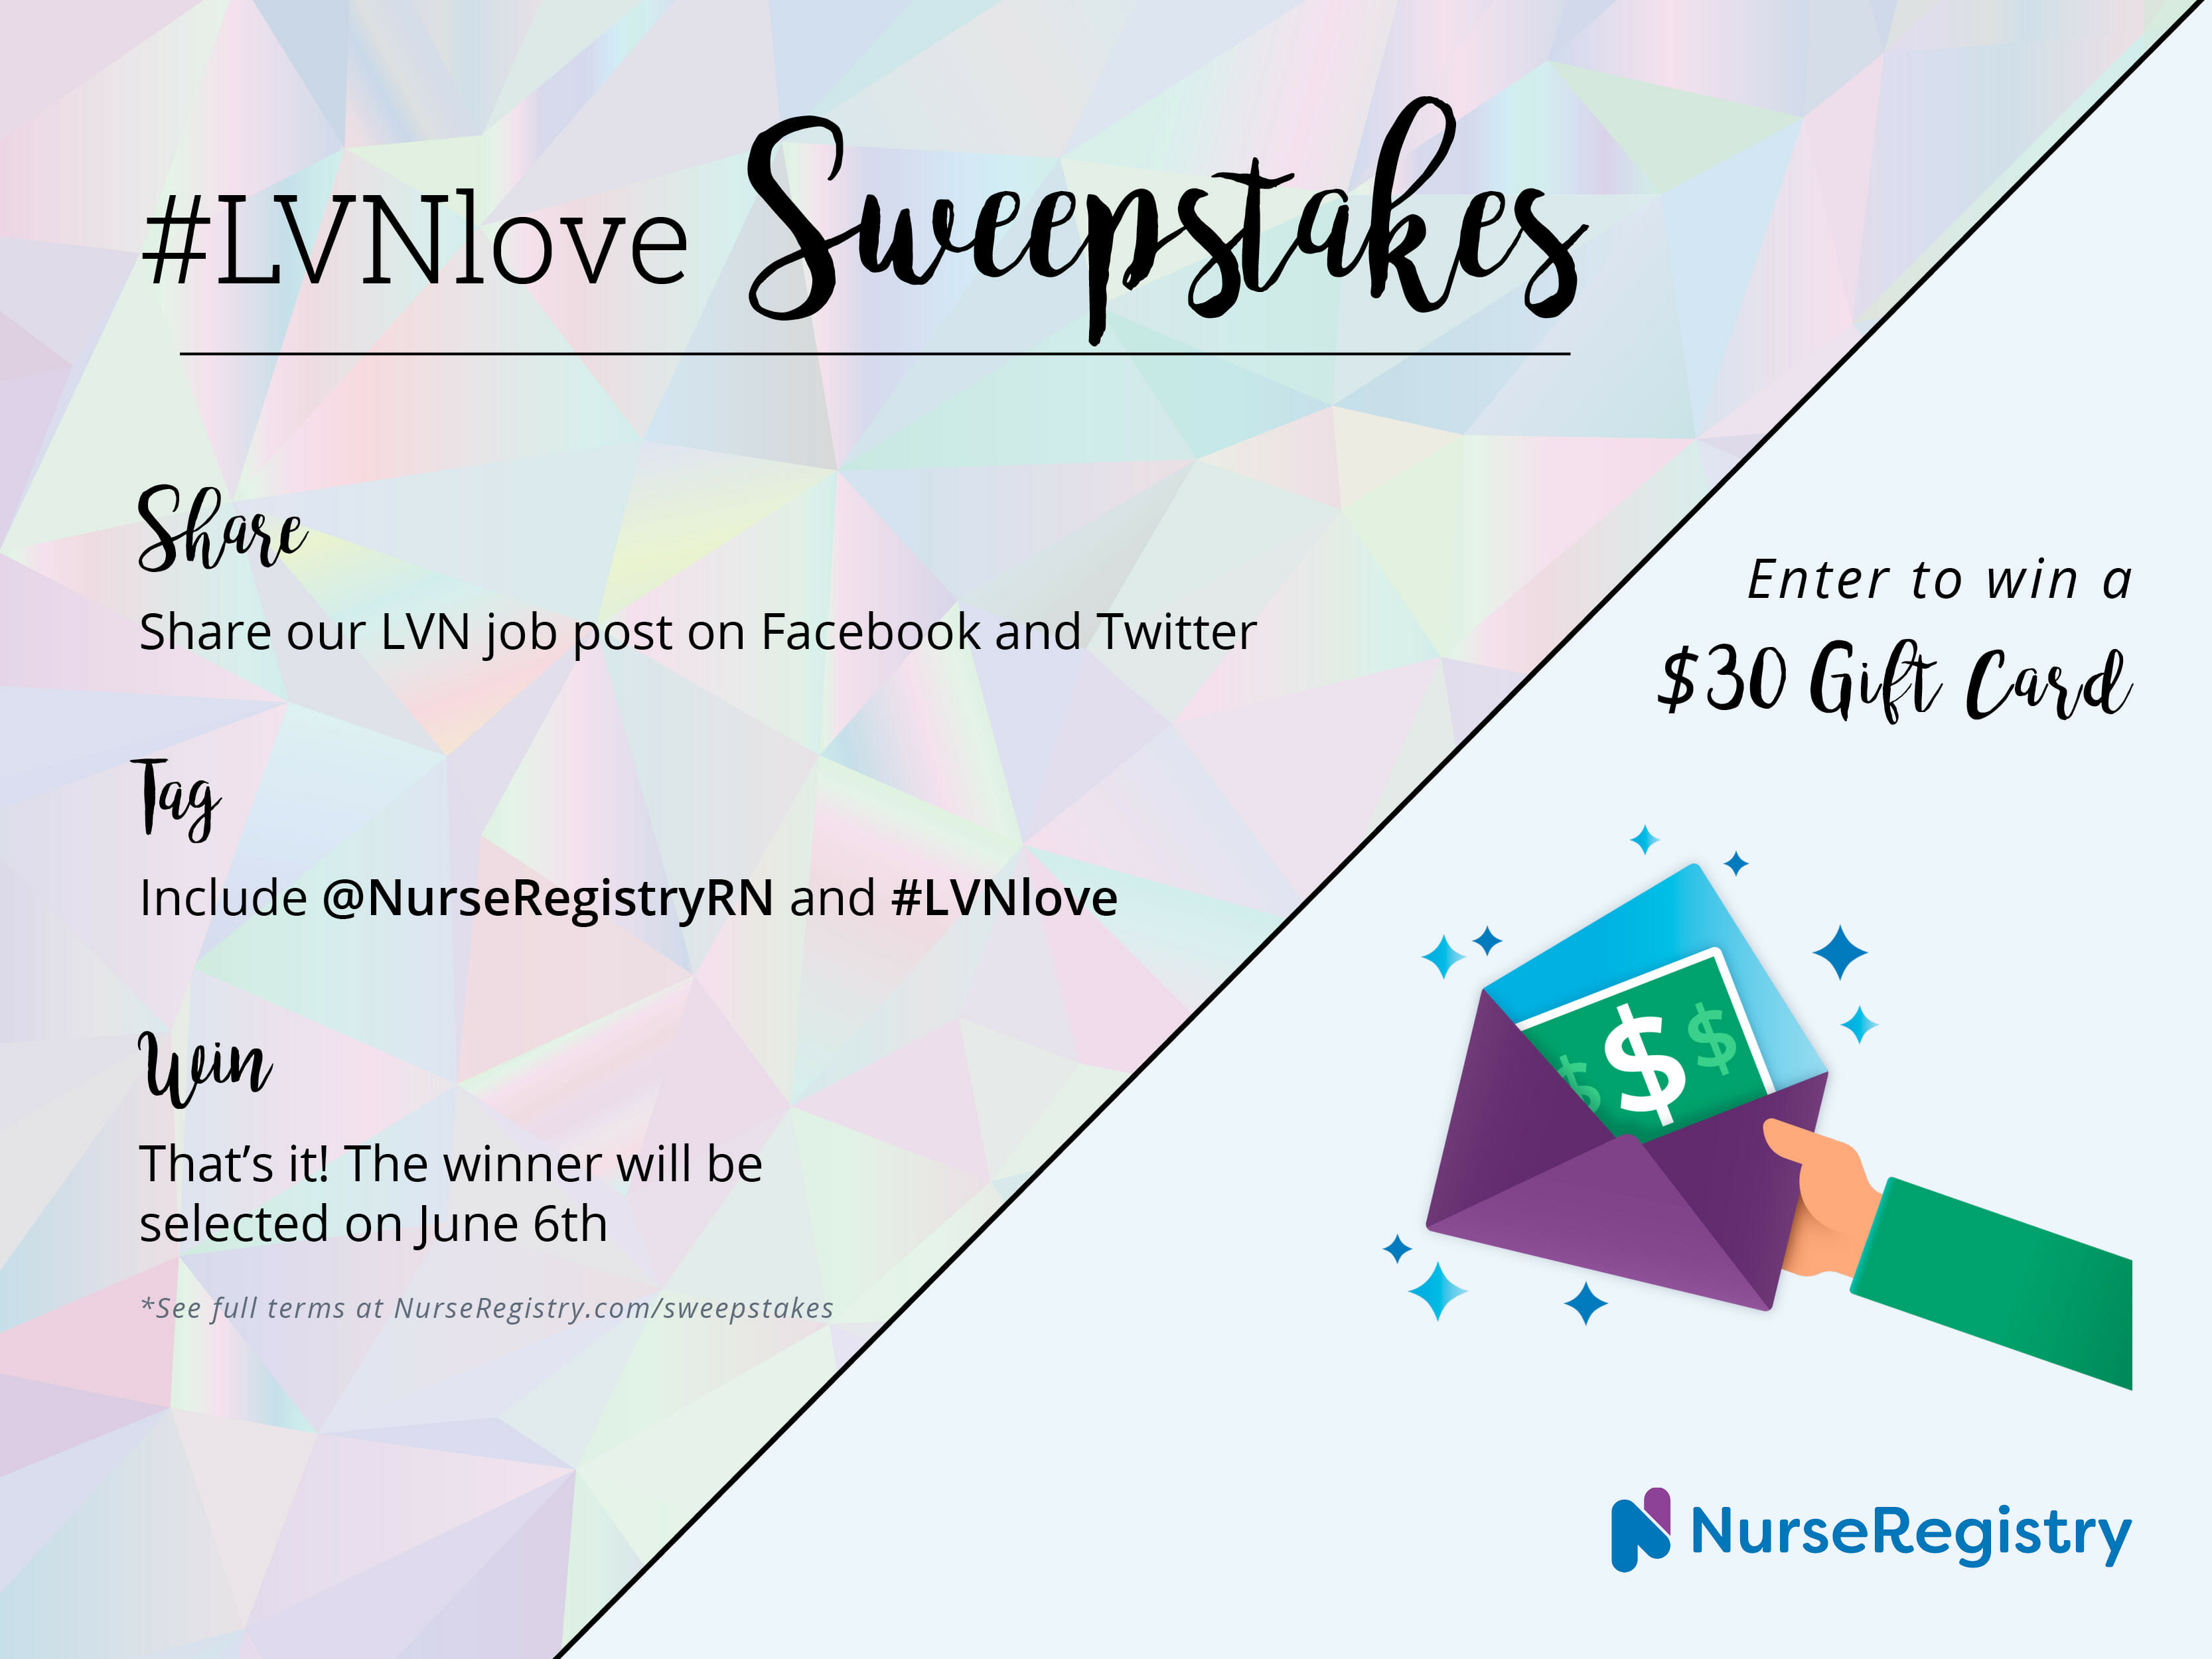 LVNlove sweepstakes